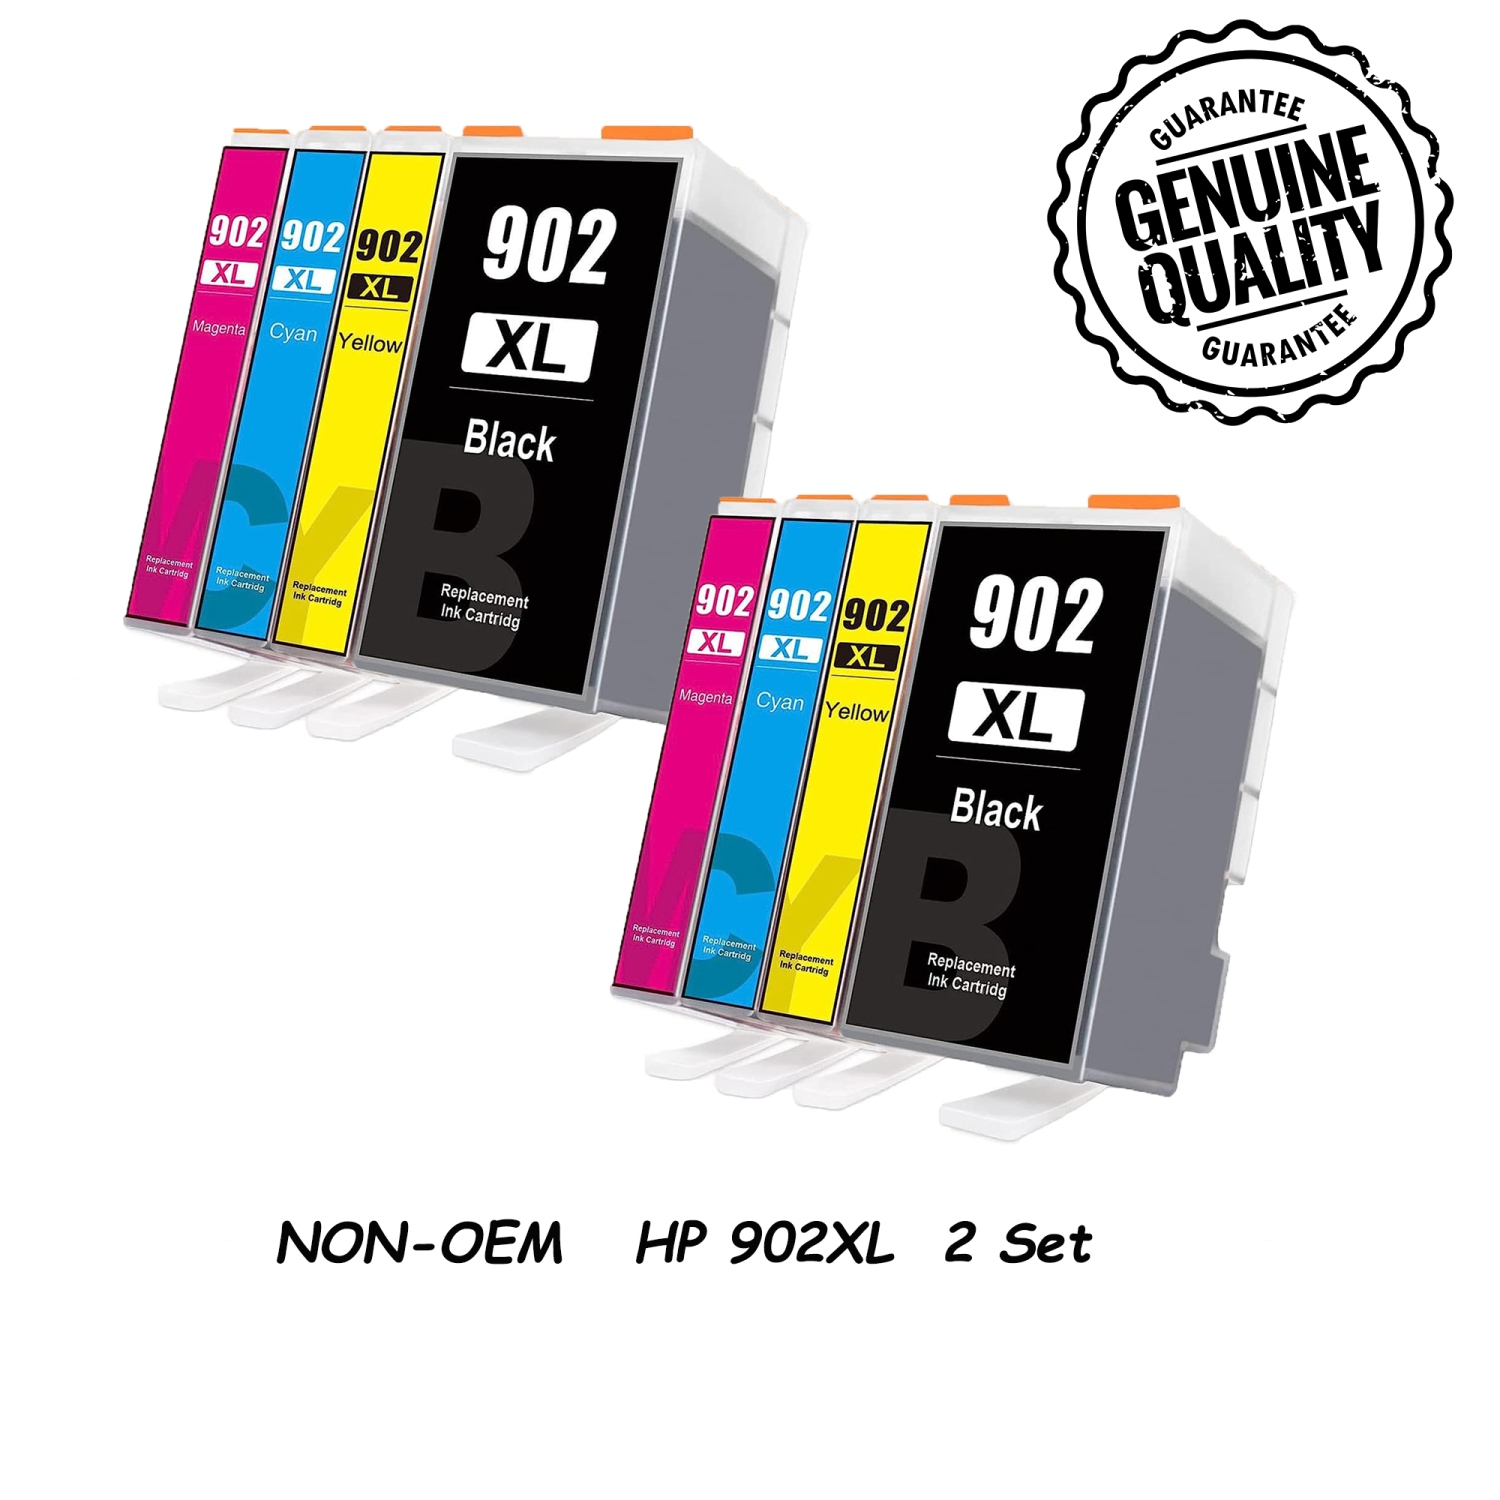 [New Chip] 2 Set Compatible HP 902 XL Ink Cartridges 902XL High Yield - HP OfficeJet 6950,6951,6954,6956,6962,6958,6900,6960,6965,6968,6970,6975,6978,6979,6961,6966, 6971